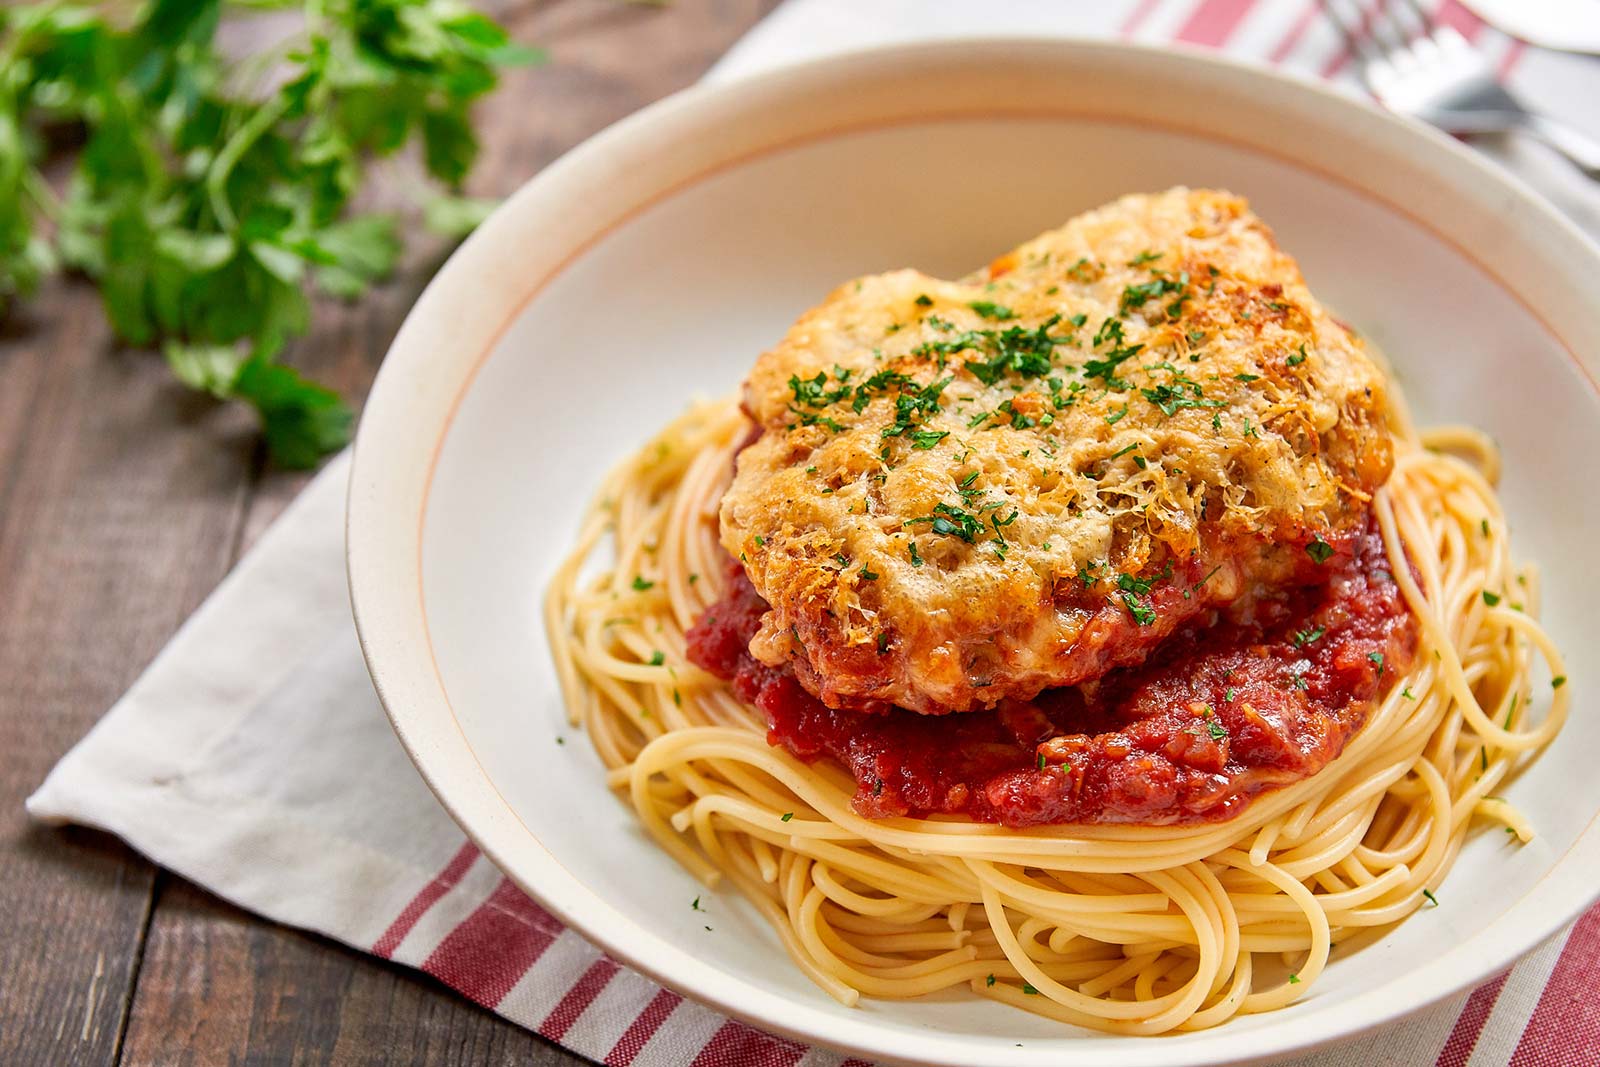 🍖 Can We Guess Your Age and Gender Based on the Meats You’ve Eaten? Chicken Parmesan2